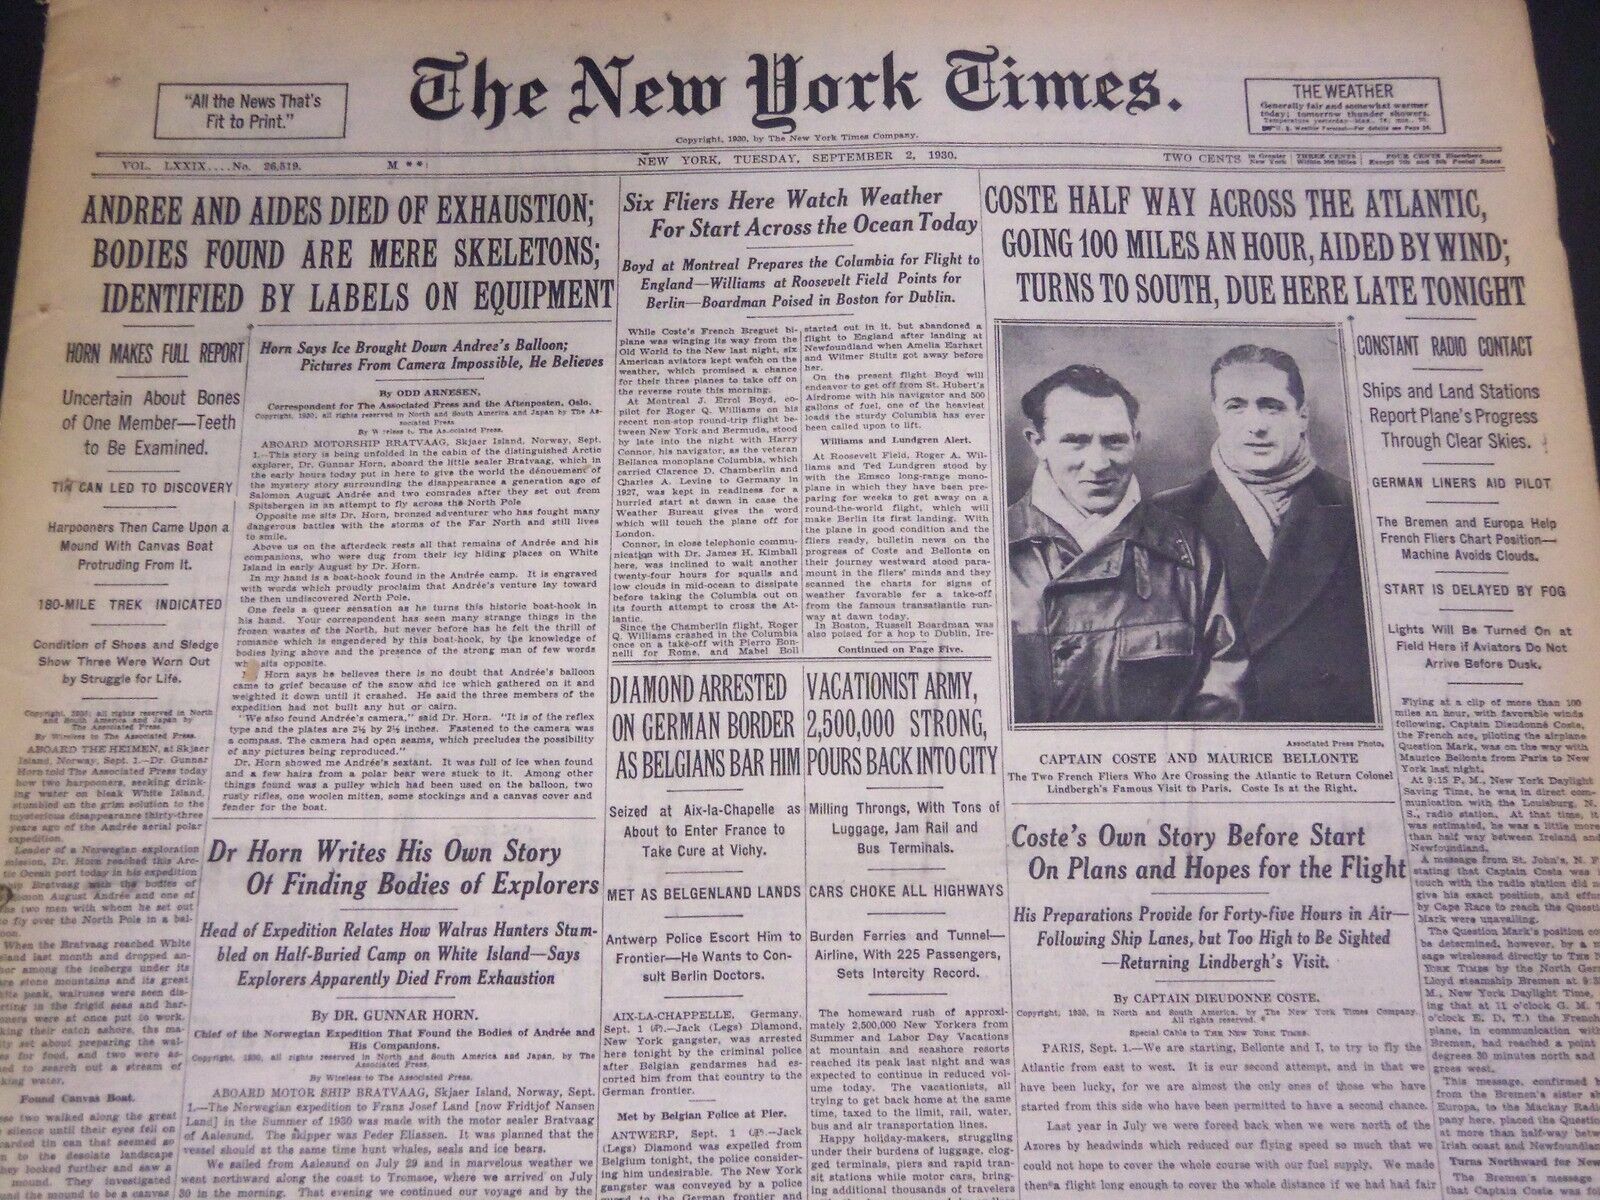 1930 SEPTEMBER 2 NEW YORK TIMES - ANDREE & AIDES DIED OF EXHAUSTION - NT 4974